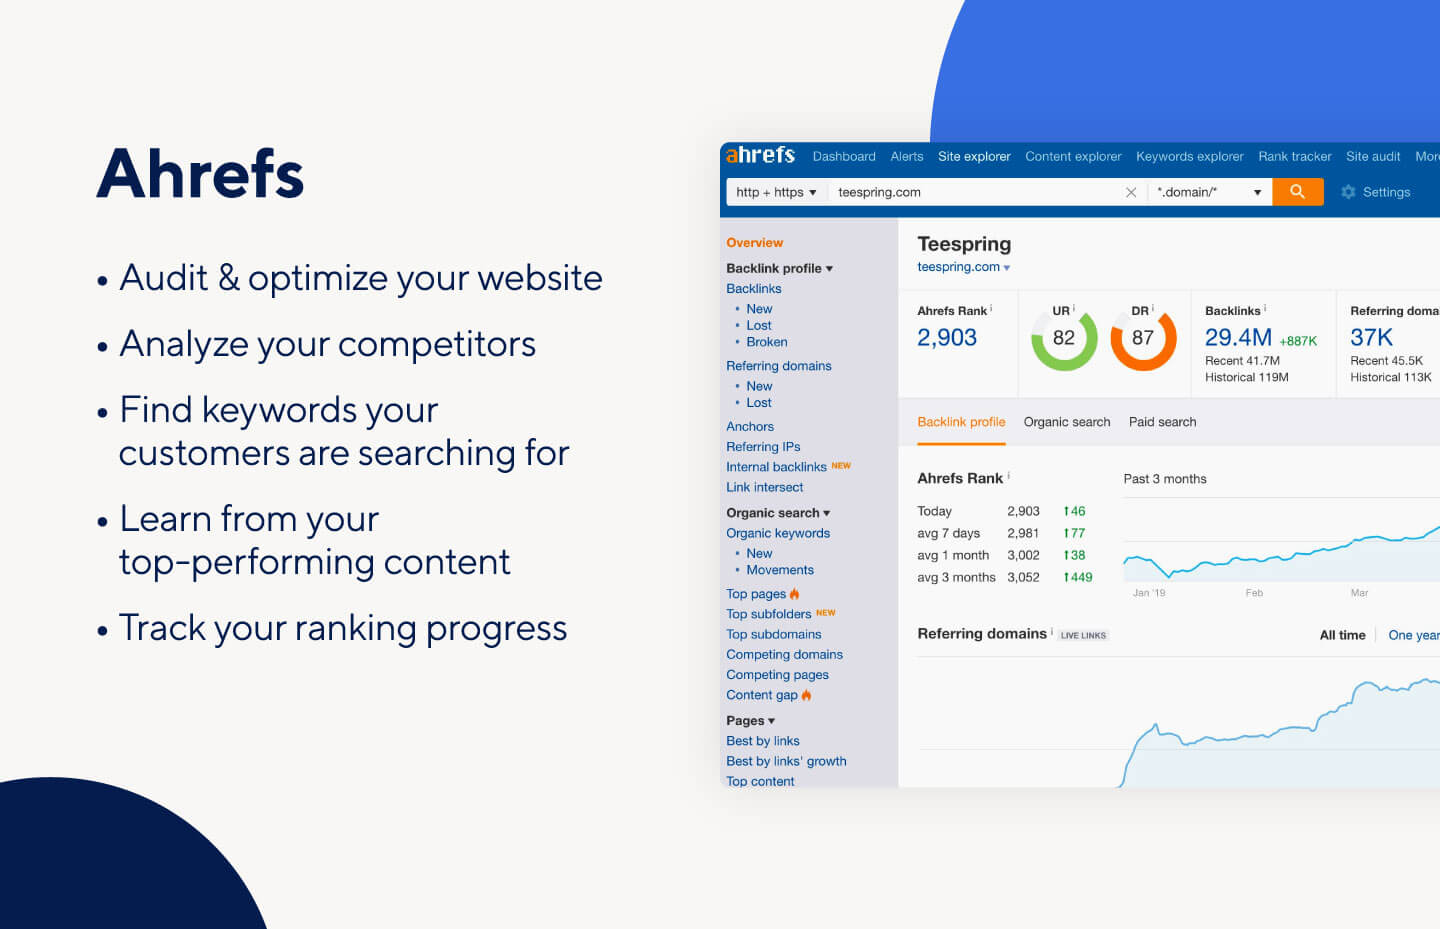 Overview of Ahrefs as a digital marketing tool.